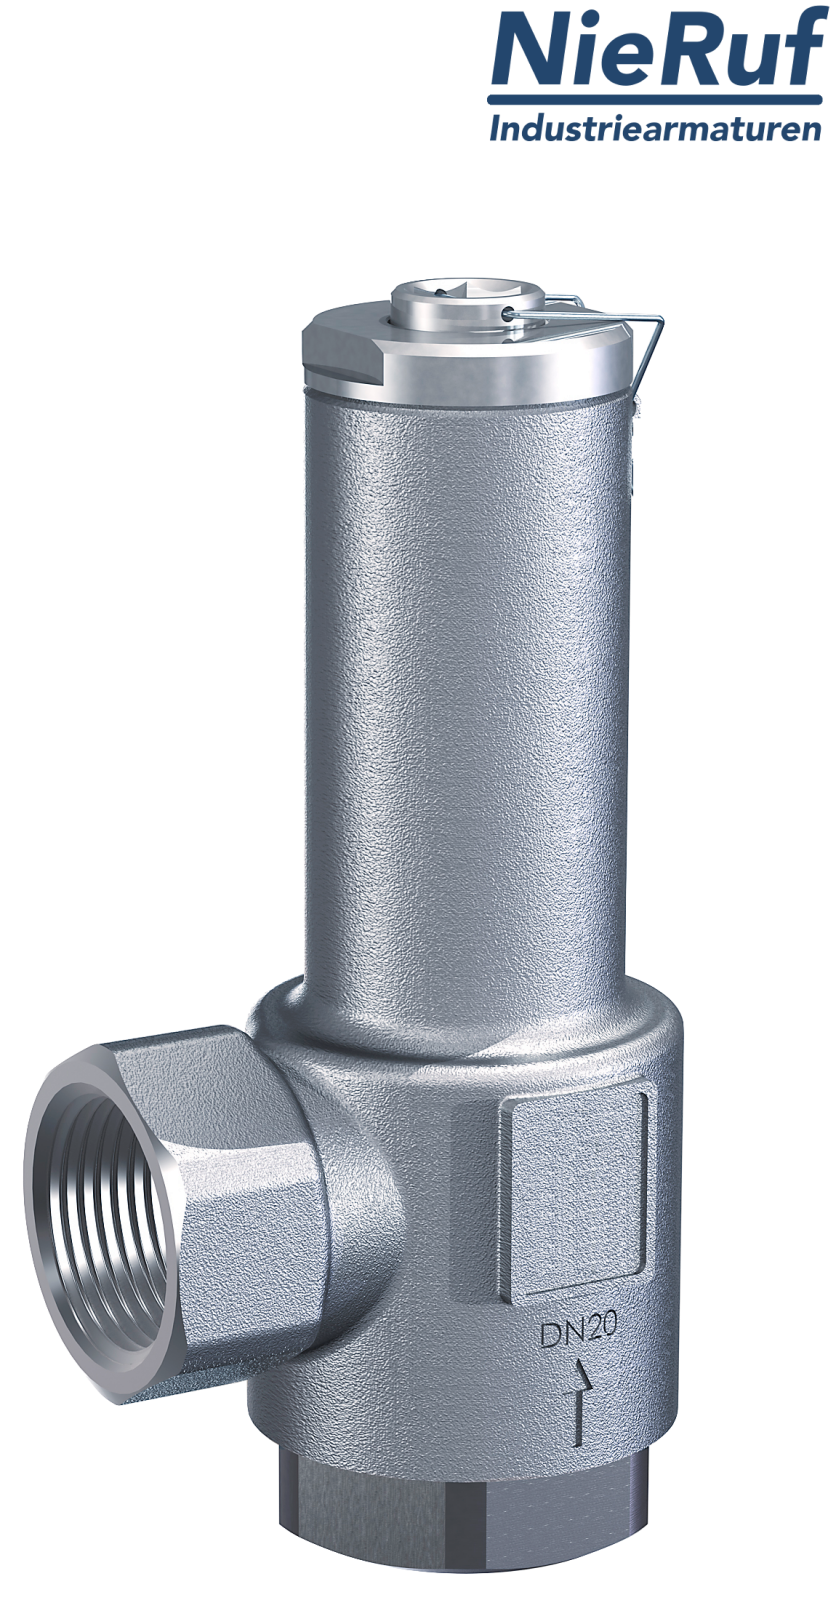 angle-type overflow valve 1 1/4" inch fm UV04 stainless steel AISI 316L 12 - 20 bar